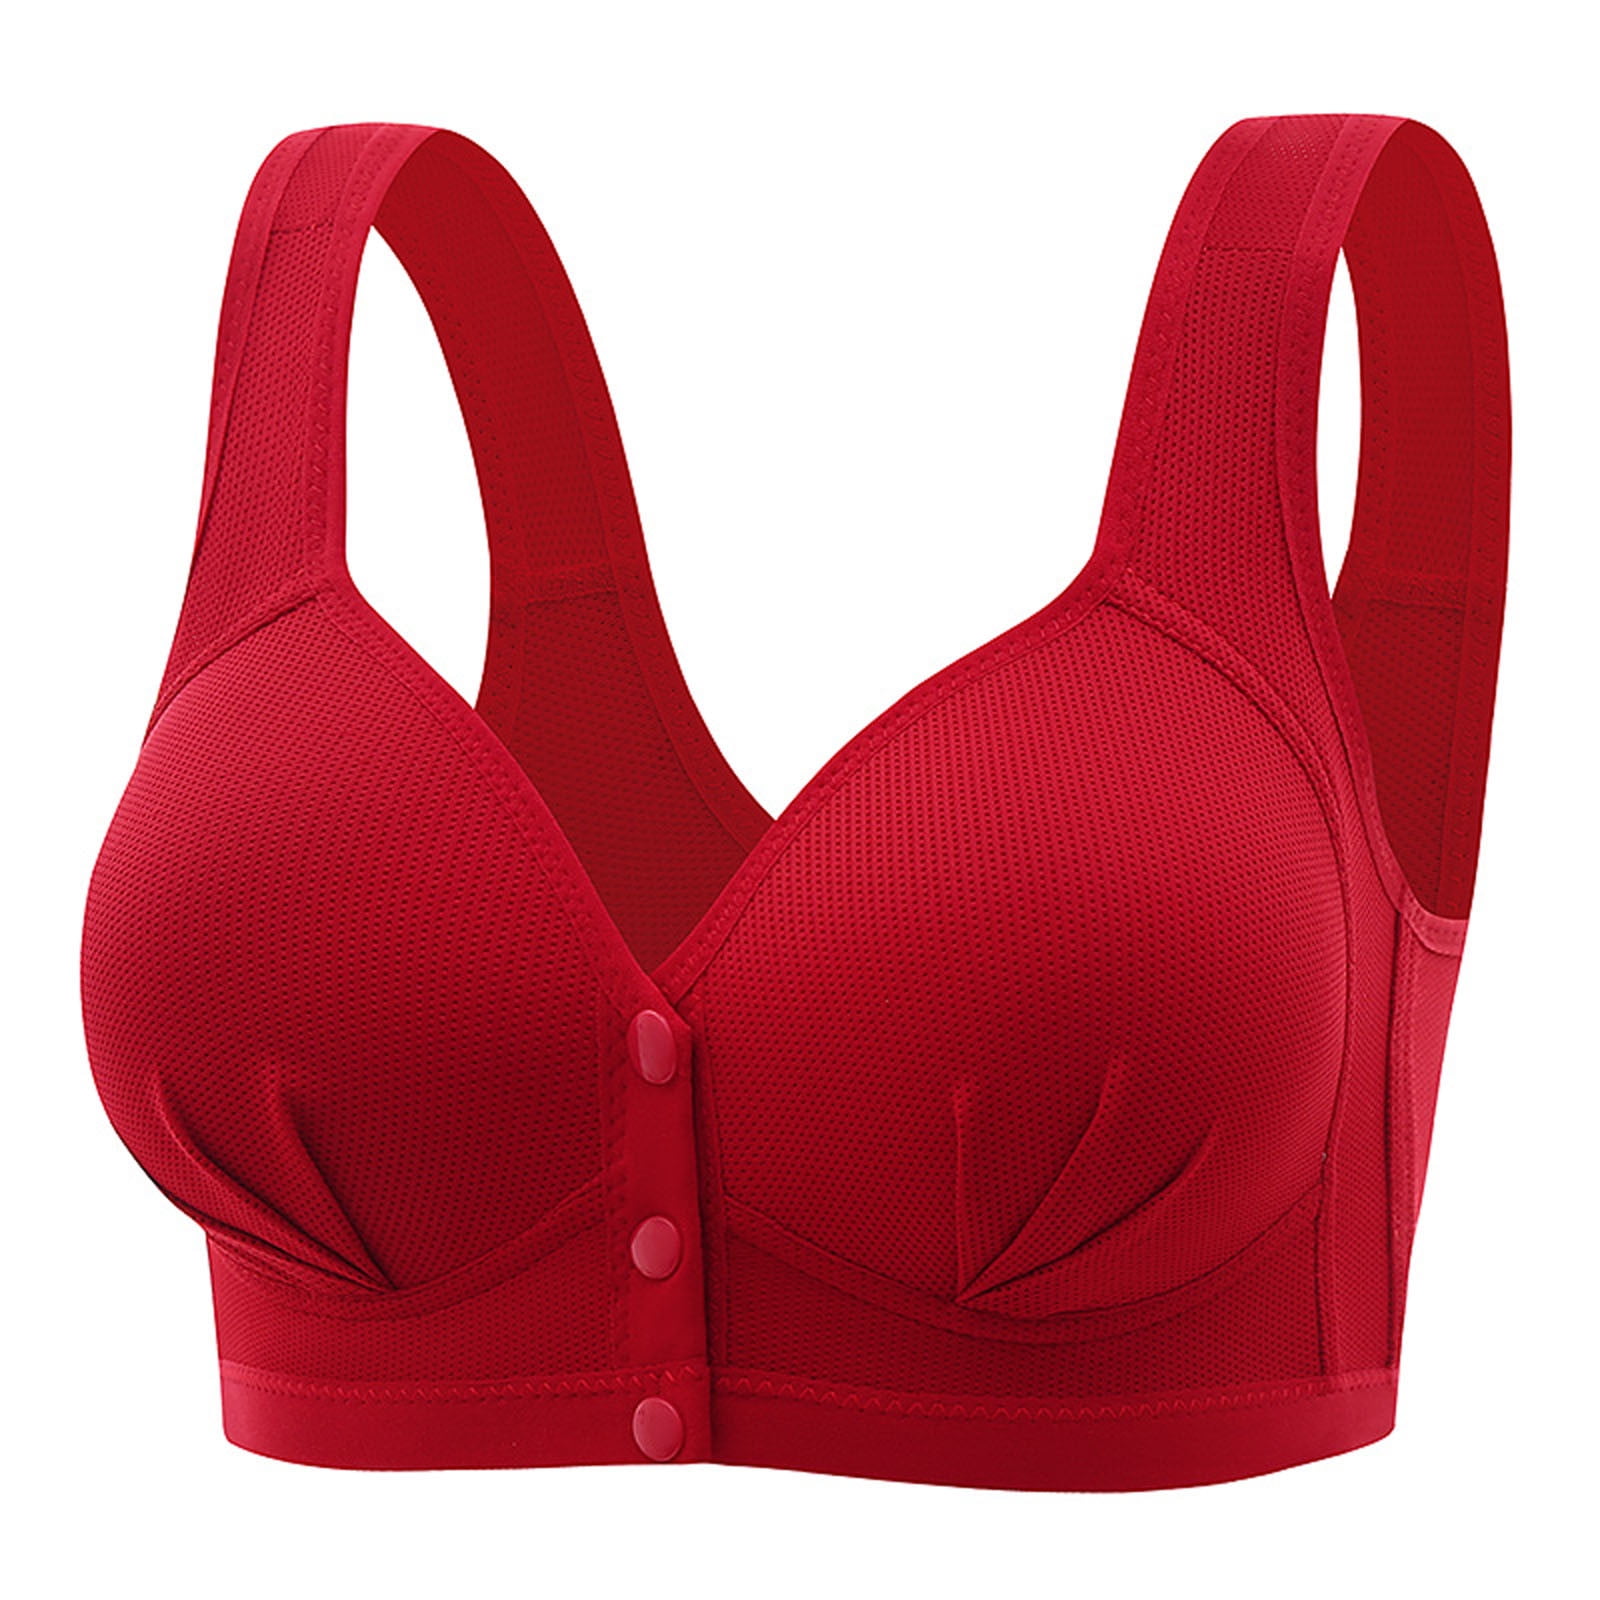 safuny Front Open Everyday Bra for Women Seamless Smoothing Fashion Summer  Wireless Holiday Push Up Ultra Light Lingerie Brassiere Underwear Comfort  Daily Pink M 